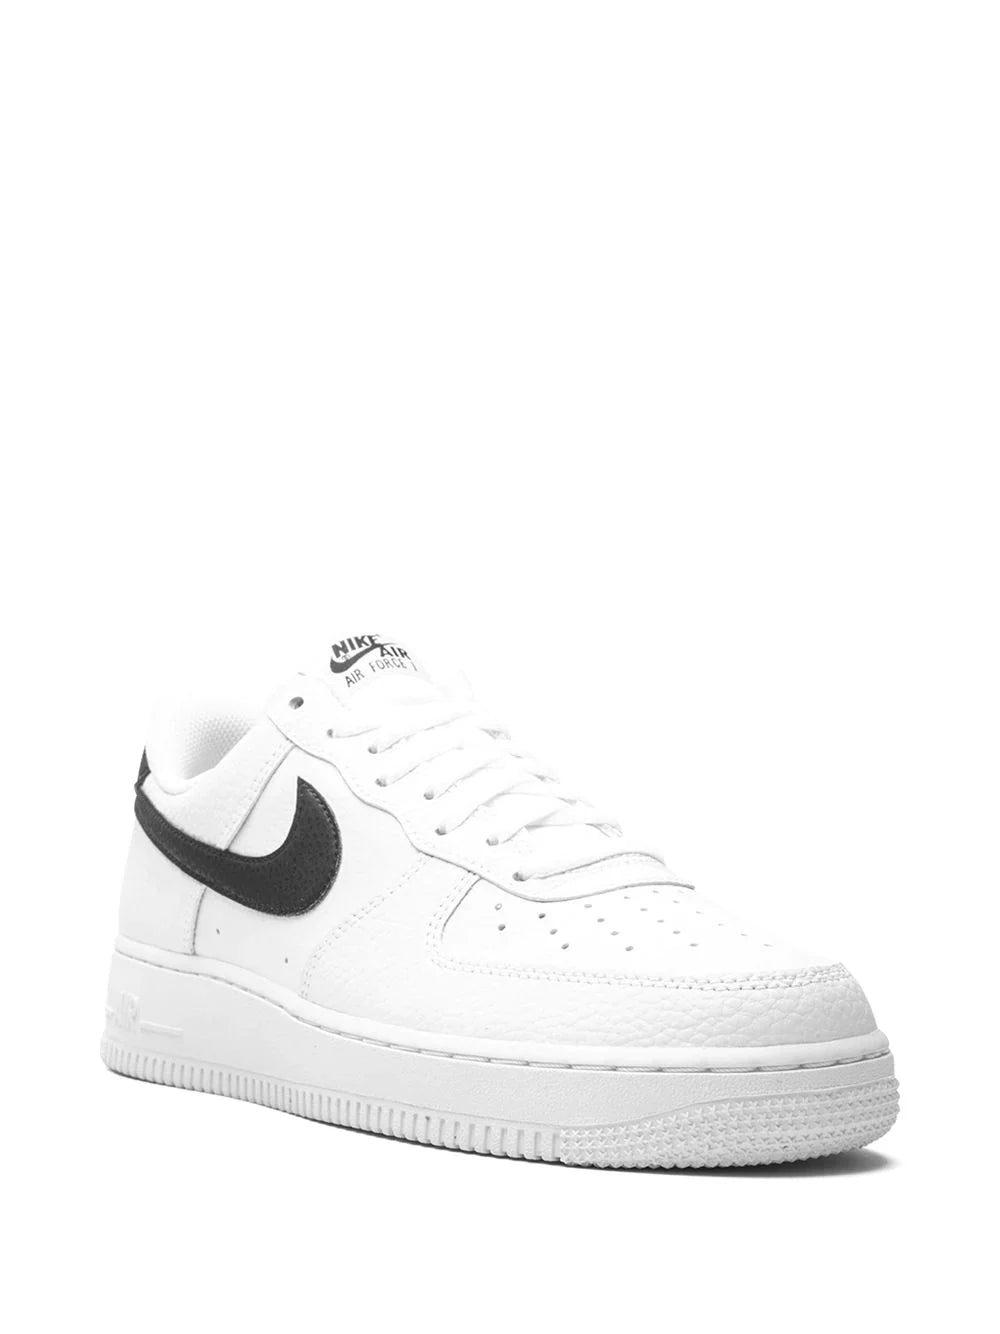 Air Force 1 Low ’07 “White/Black”